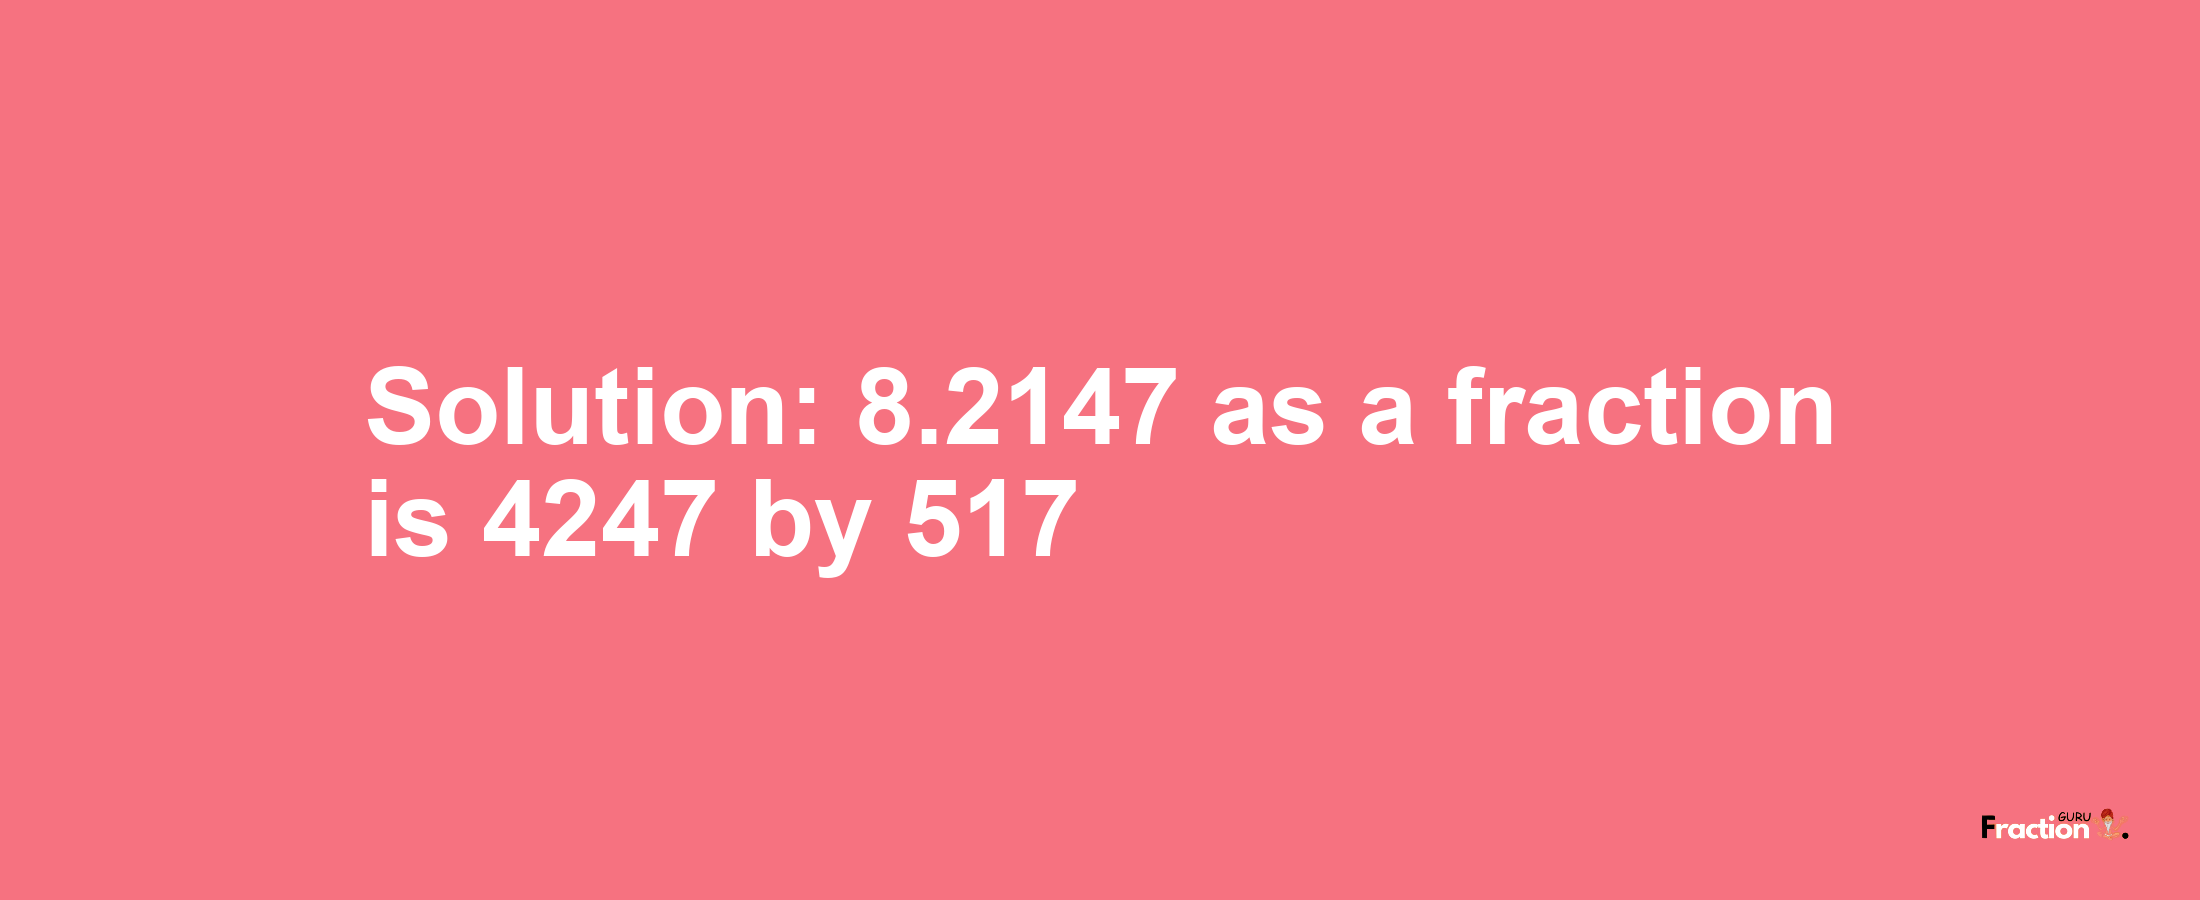 Solution:8.2147 as a fraction is 4247/517